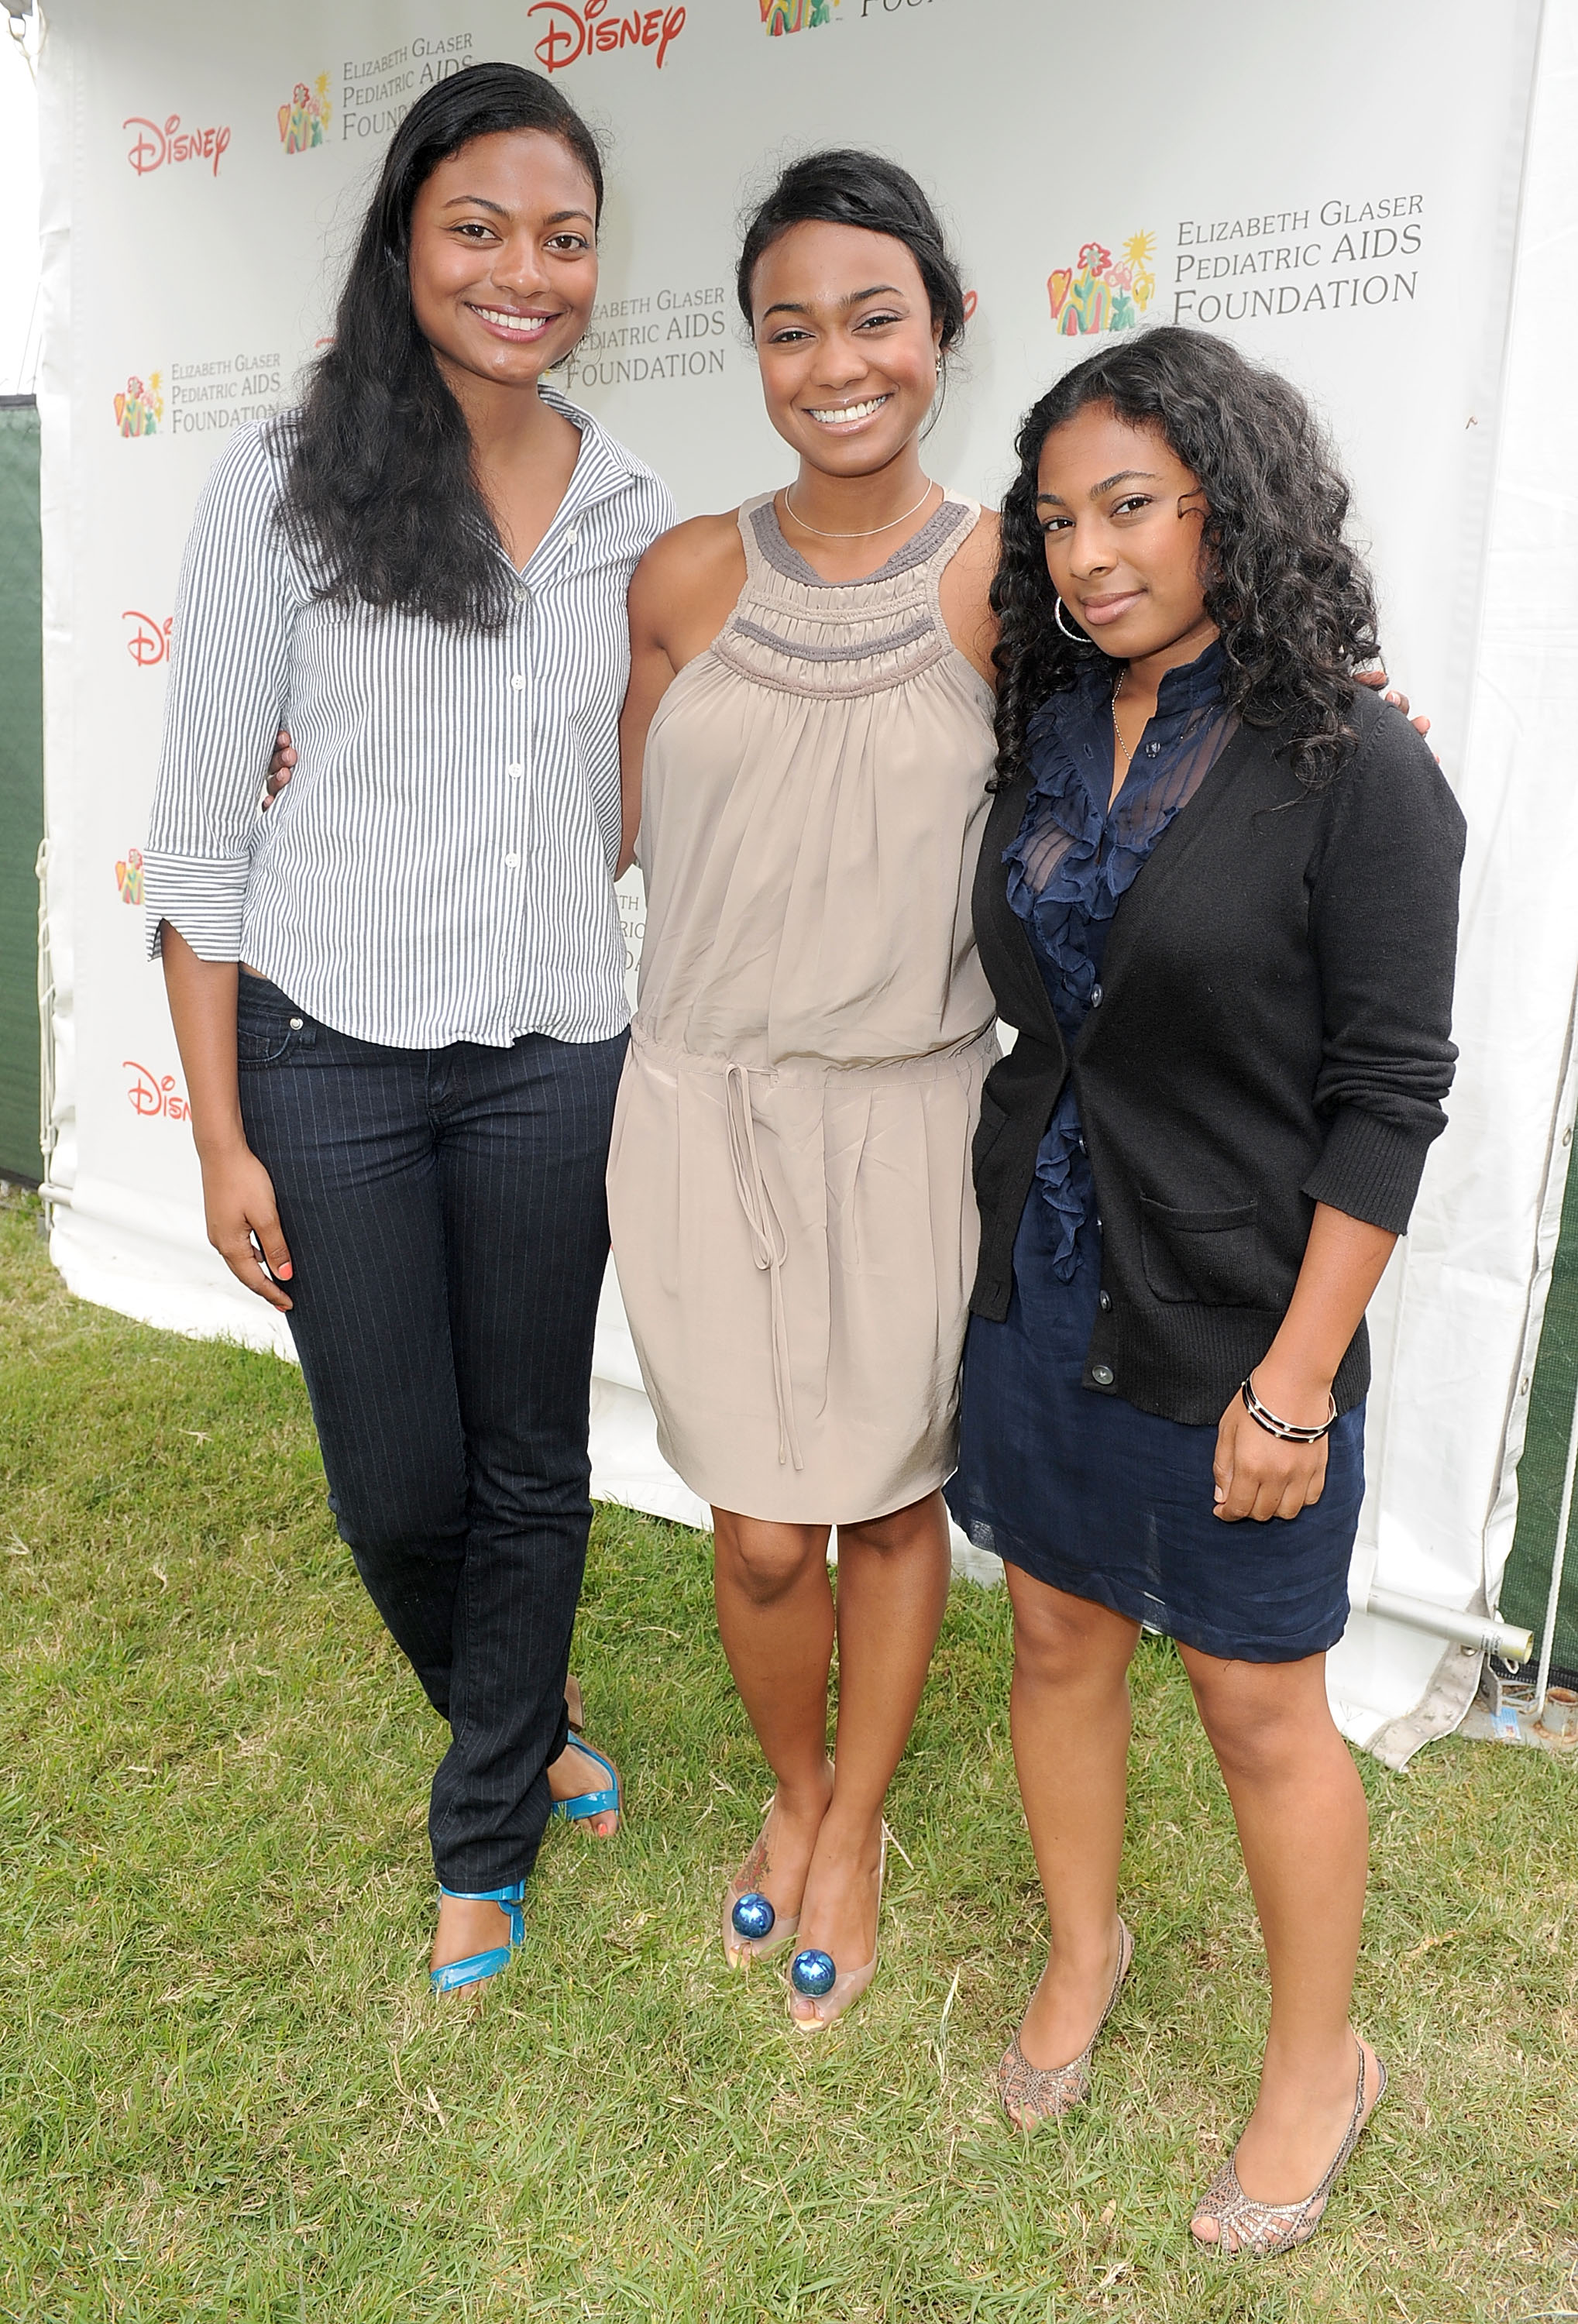 (L-R) Anastasia Ali, Tatyana Ali, and Kimberly Ali arrive at the 21st A Time For Heroes Celebrity Picnic sponsored by Disney to benefit the Elizabeth Glaser Pediatric Aids Foundation held at Wadsworth Great Lawn on June 13, 2010, in Los Angeles, California. | Source: Getty Images